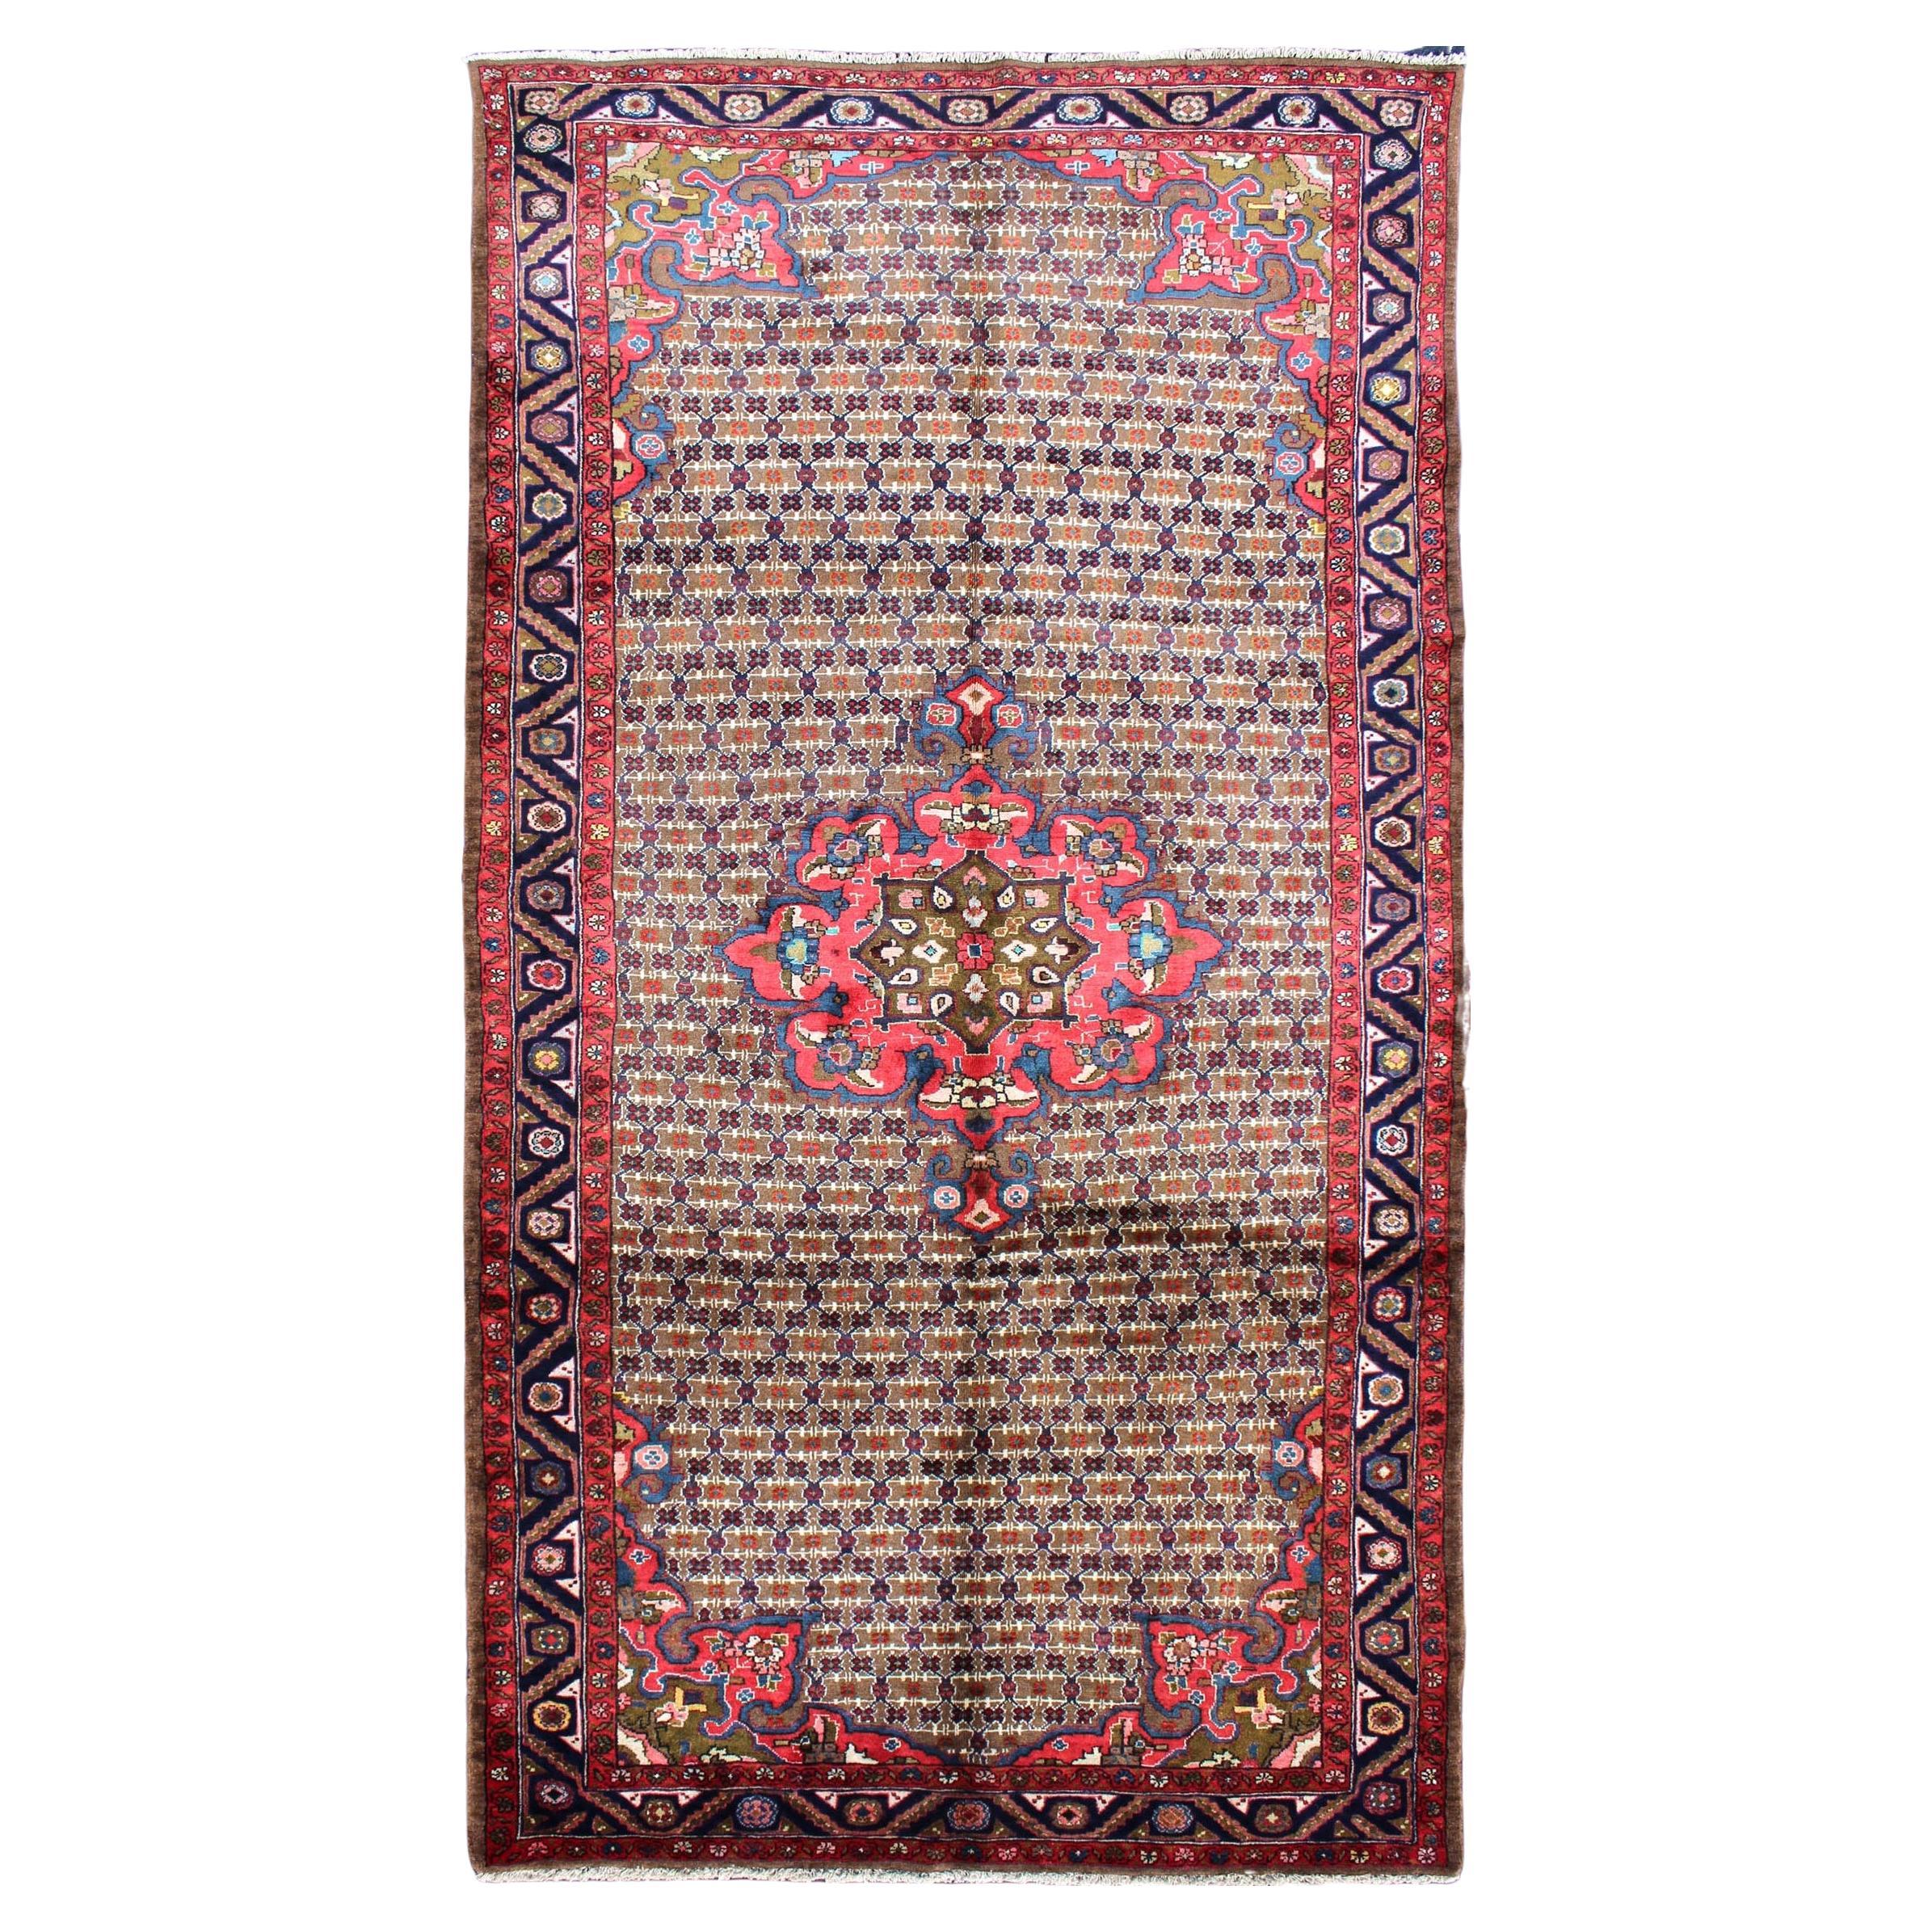 Vintage Persian Gallery Camel Hair Floral Medallion Hamadan Rug in Red and Brown